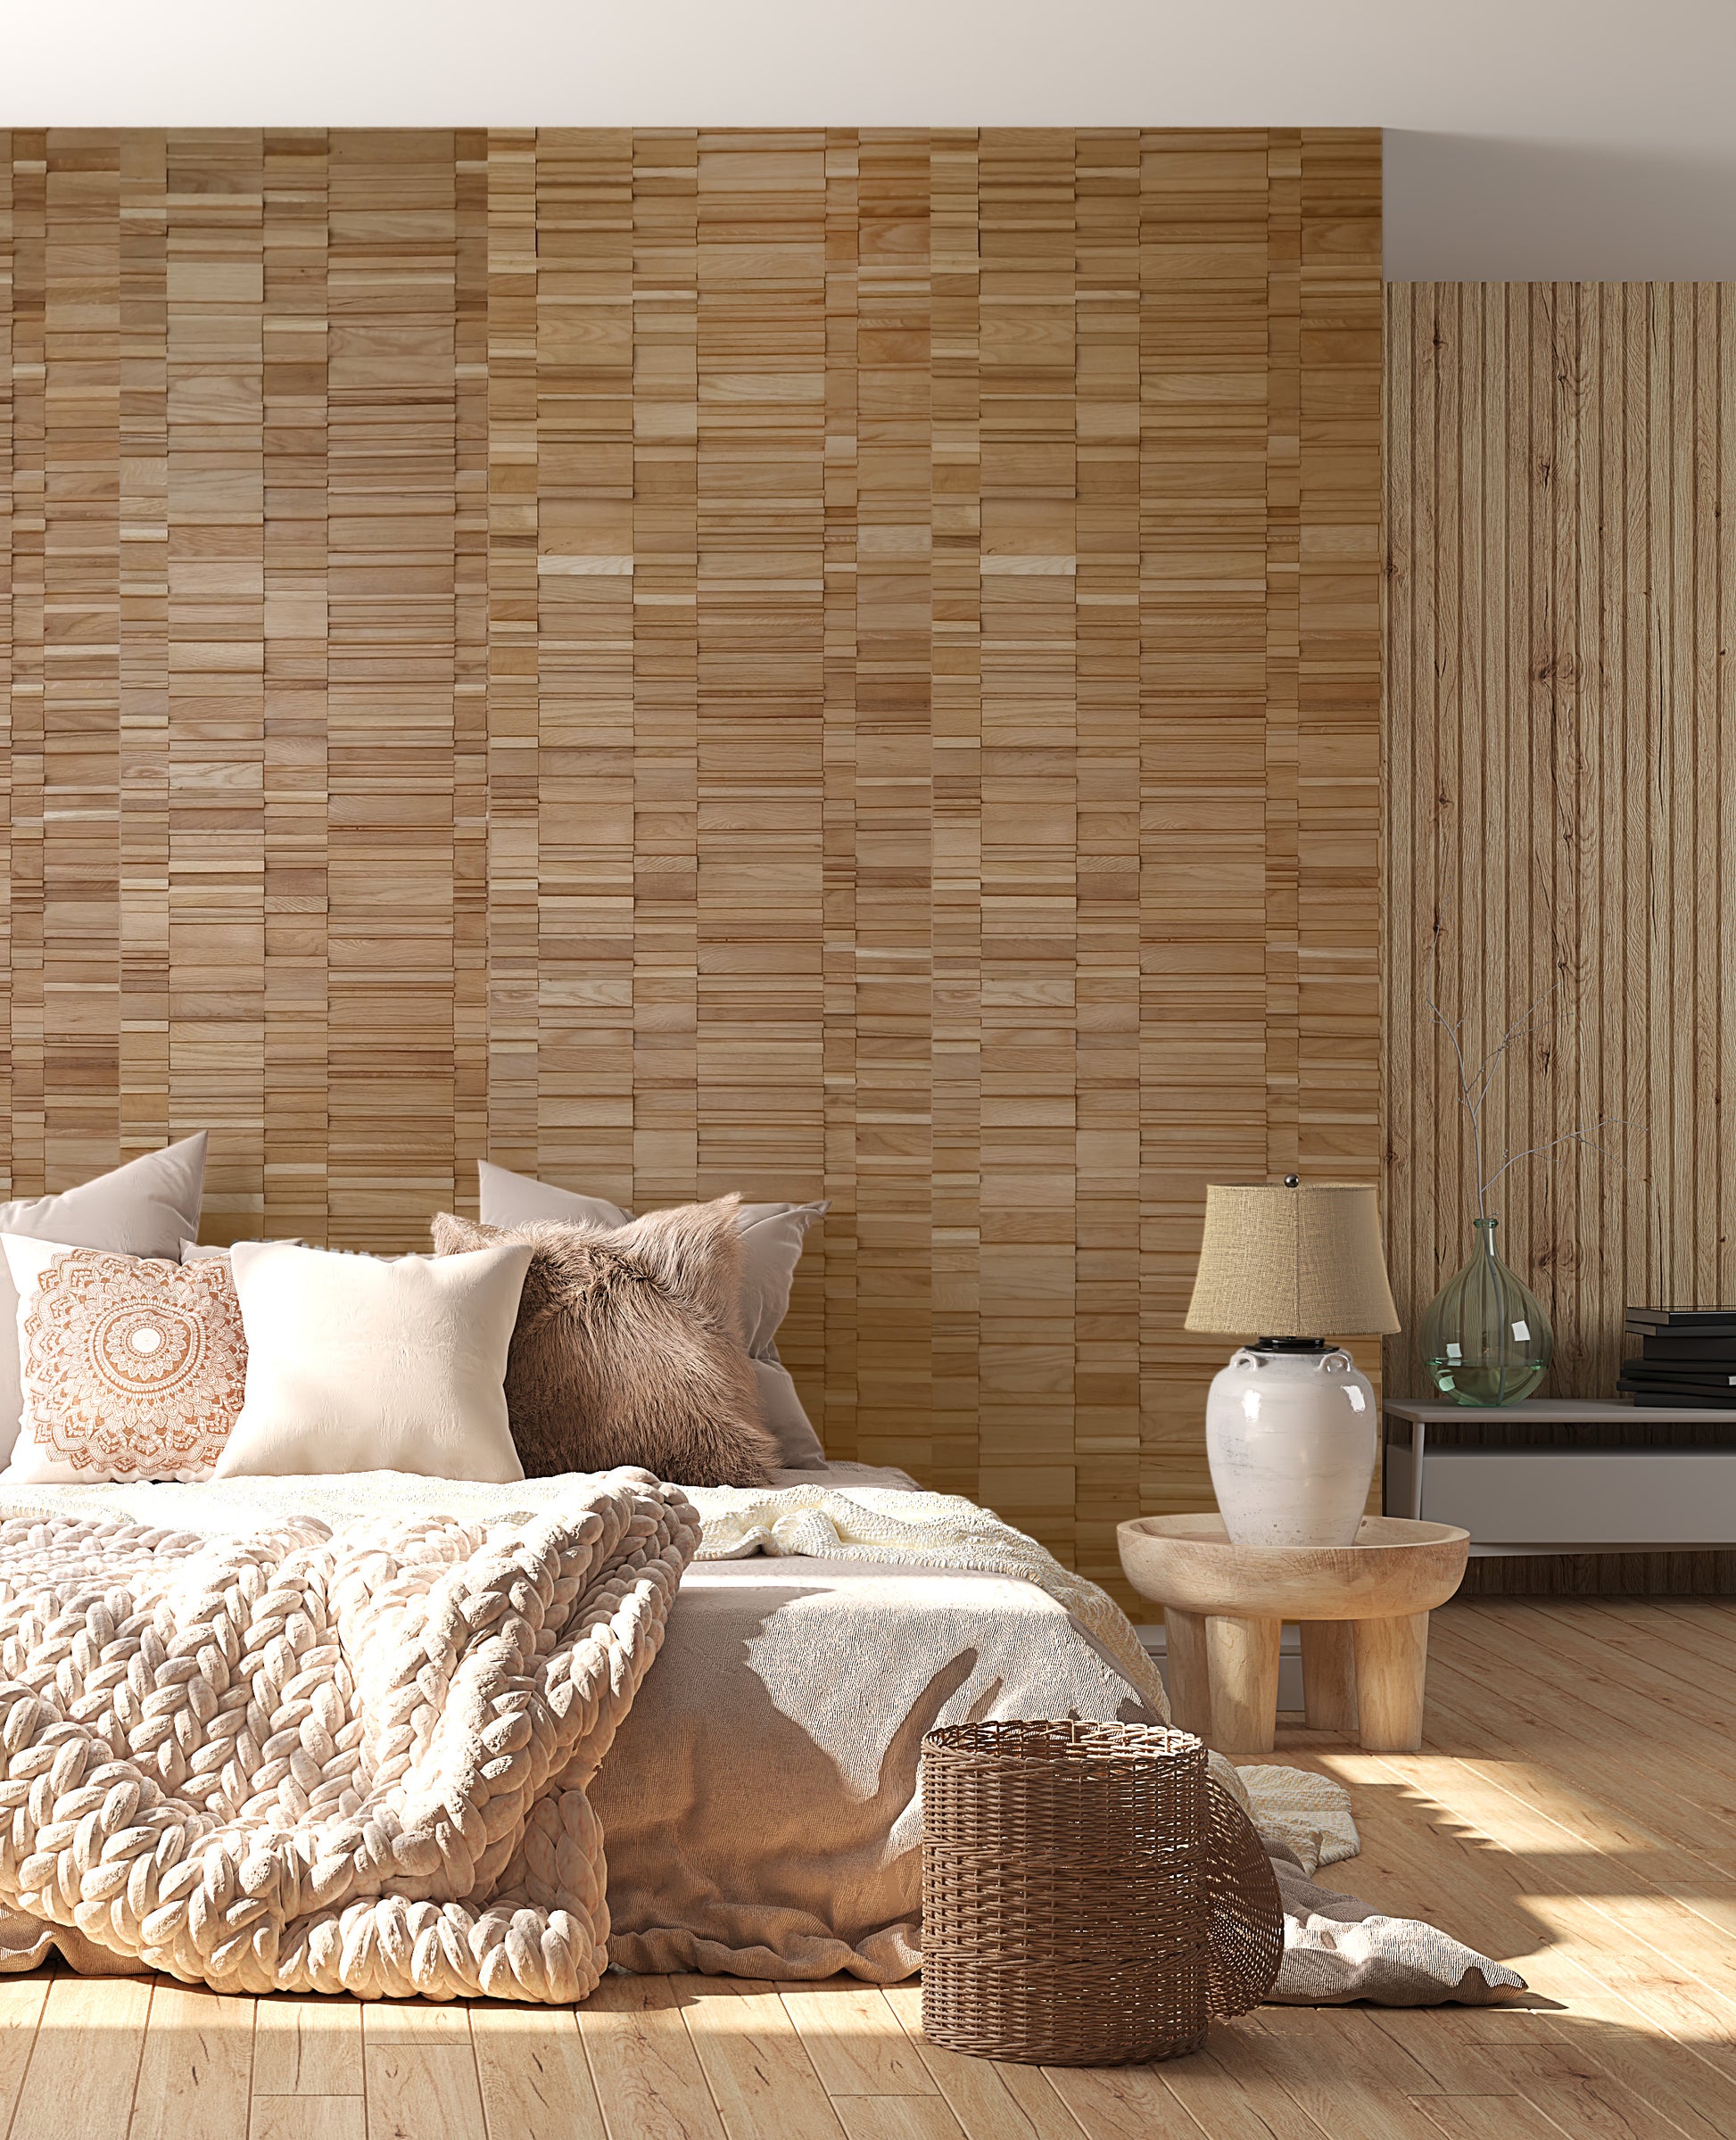 architectural wall tiles in oak for bedroom